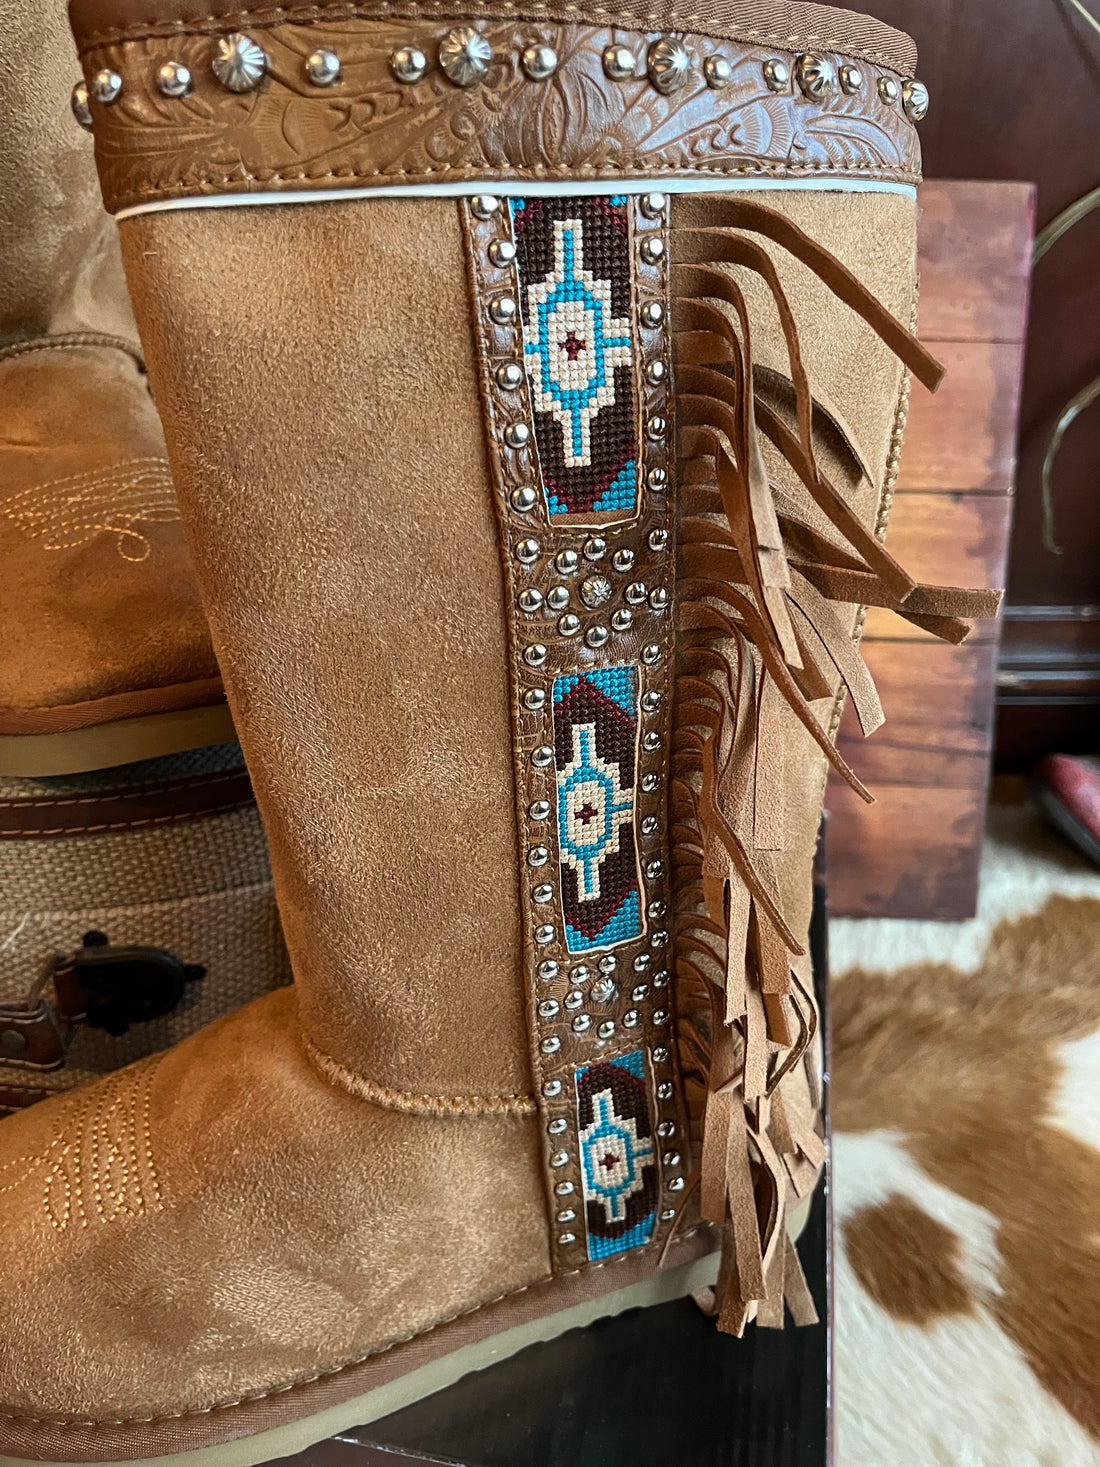 Montana West, Mid Calf Light Brown Fur Lined Boots w/Aztec Tapestry And Fringed